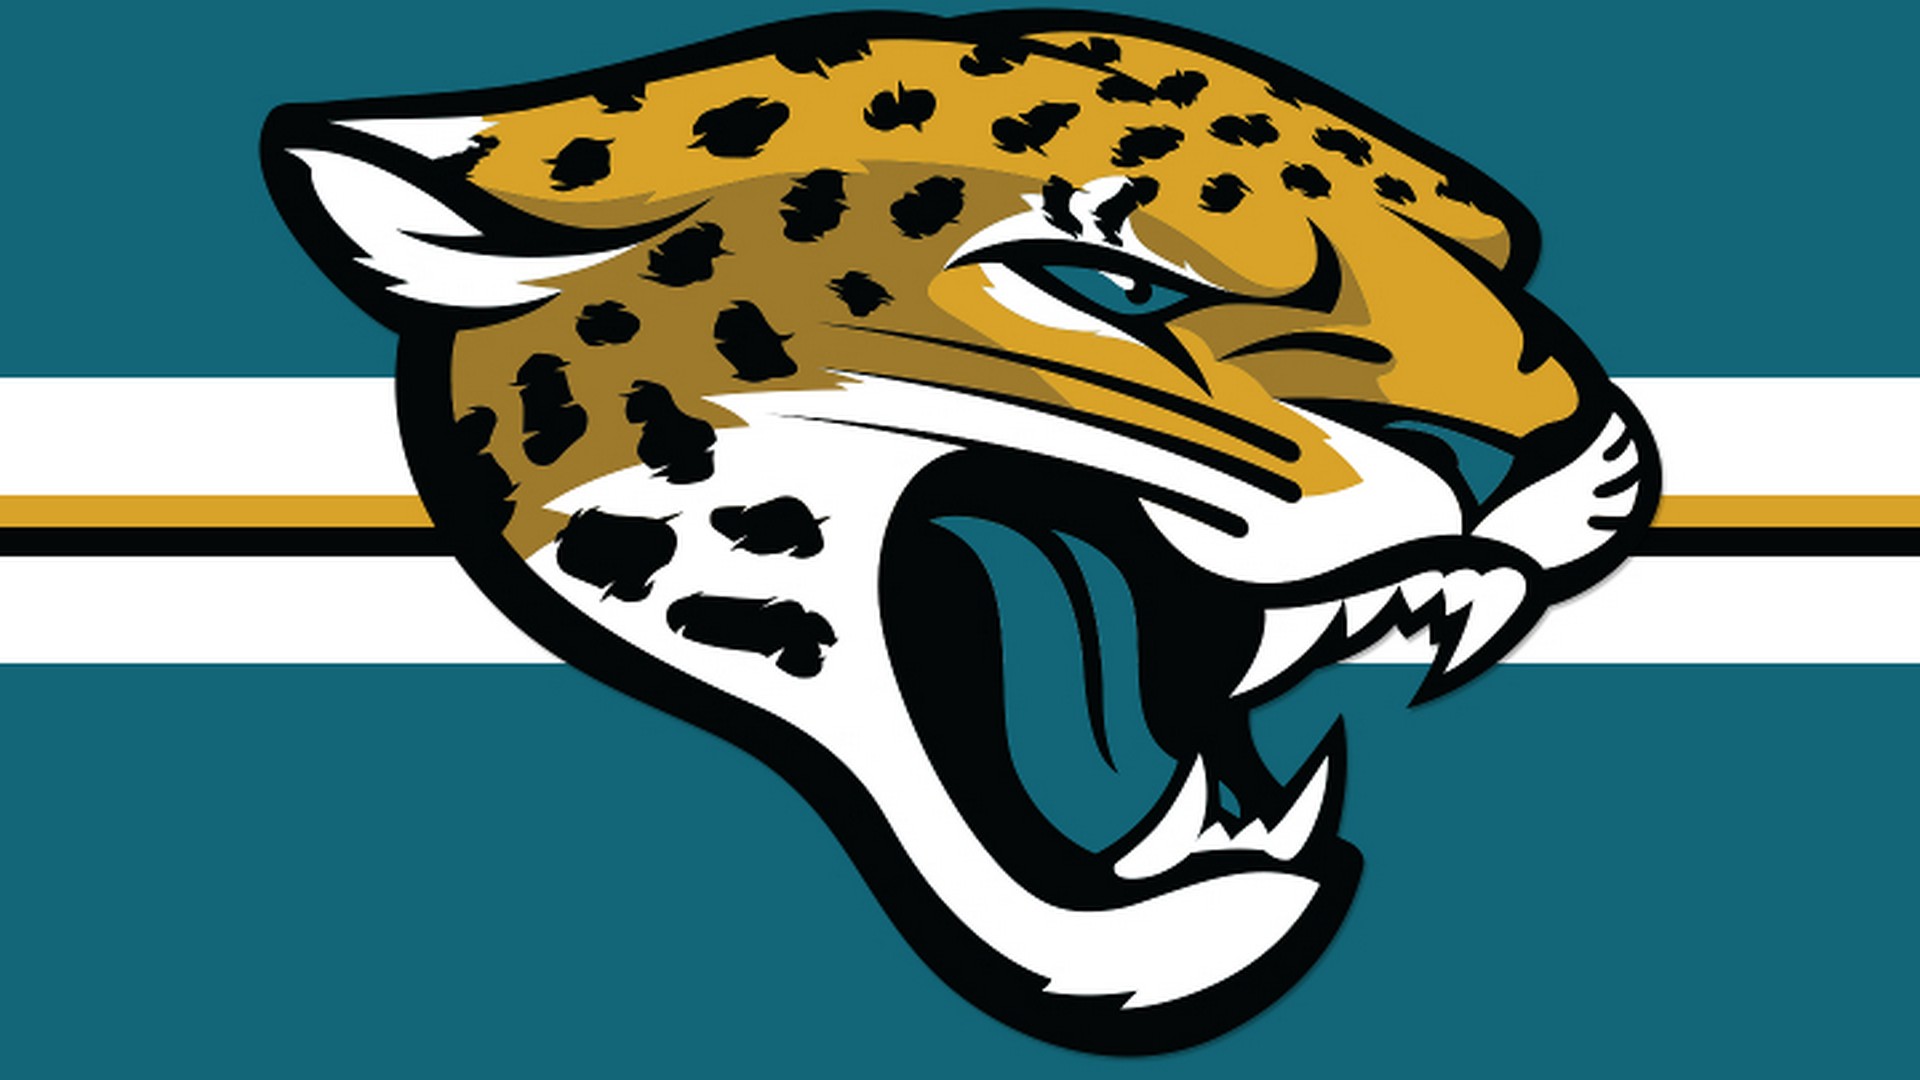 Wallpapers Jacksonville Jaguars With Resolution 1920X1080 pixel. You can make this wallpaper for your Mac or Windows Desktop Background, iPhone, Android or Tablet and another Smartphone device for free